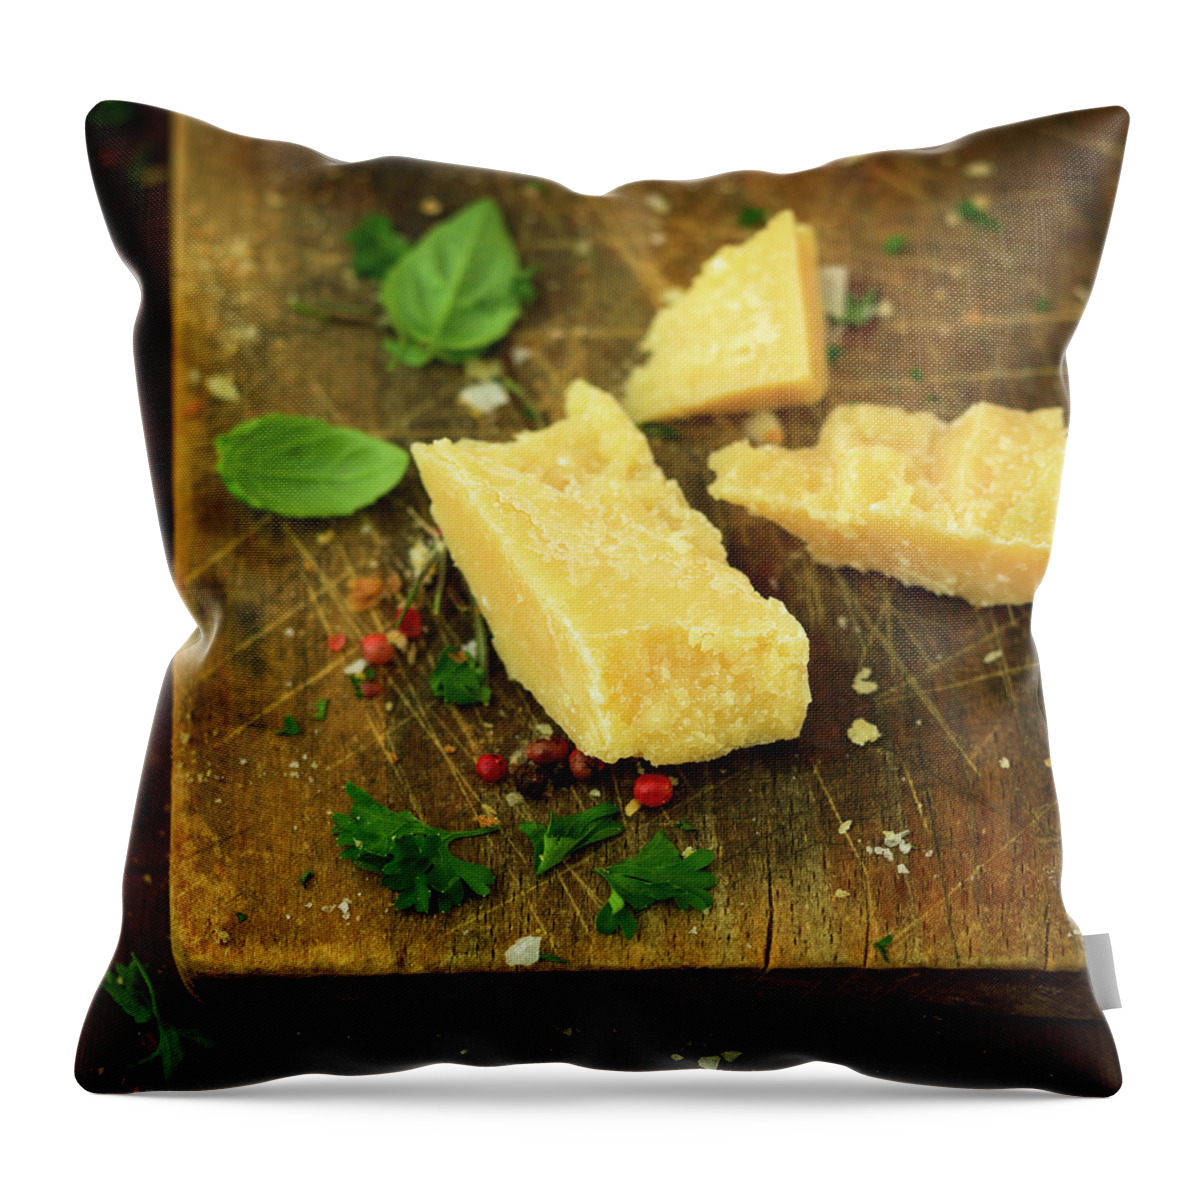 Cheese Throw Pillow featuring the photograph Parmesan Cheese by Thepalmer